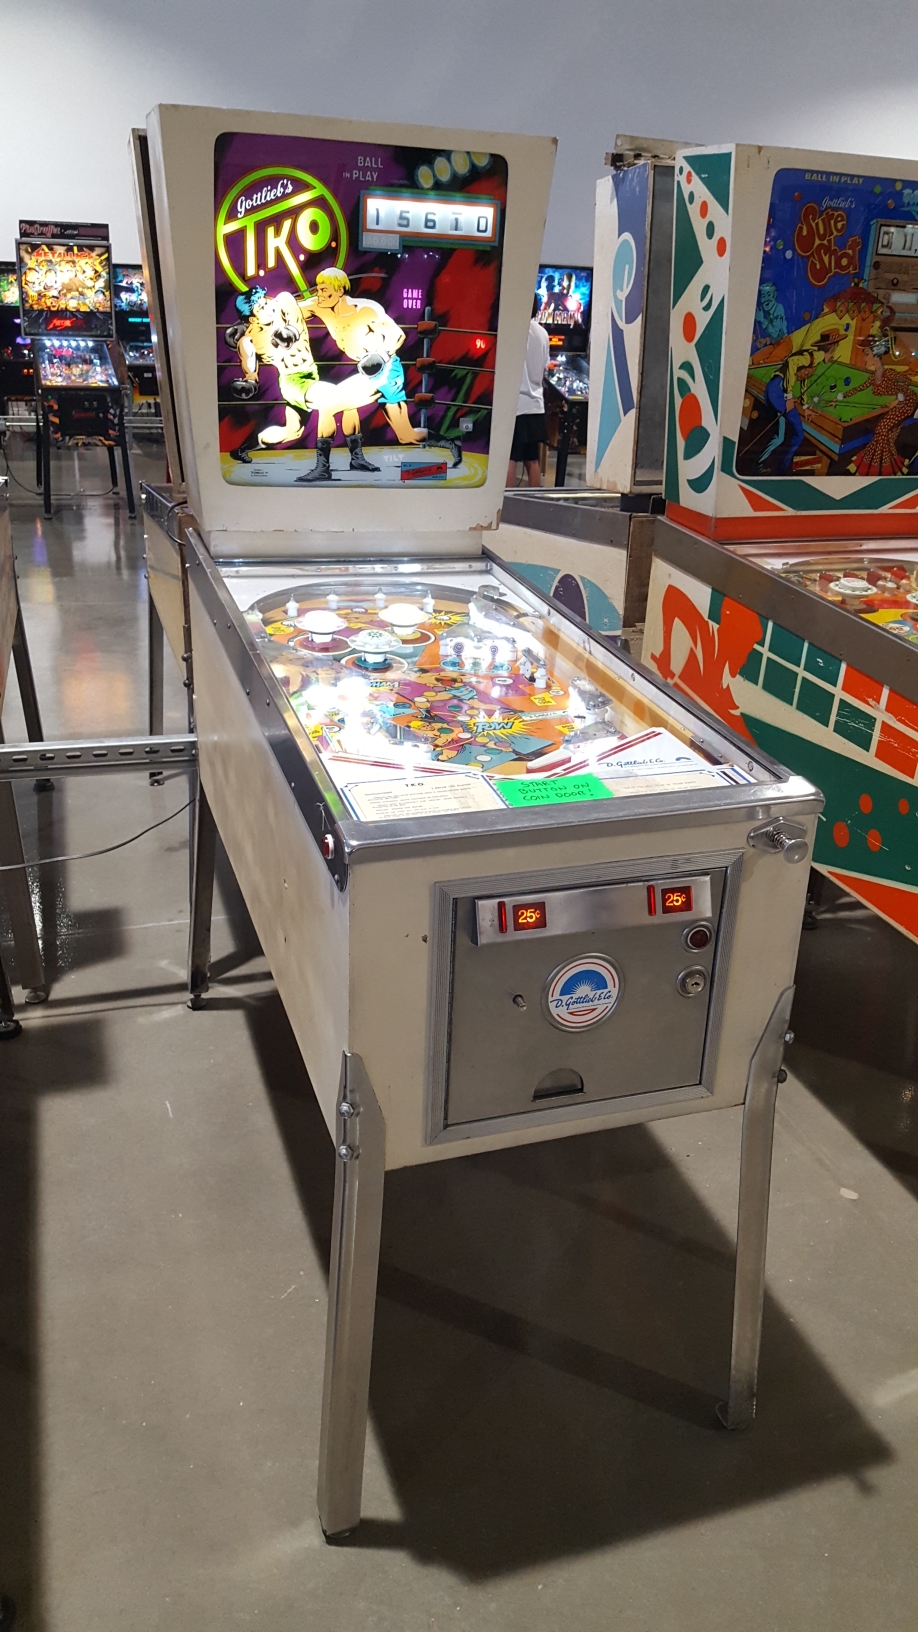 1979 Gottlieb T.K.O. at Pinball Hall of Fame Pinball Museum, info/pictures